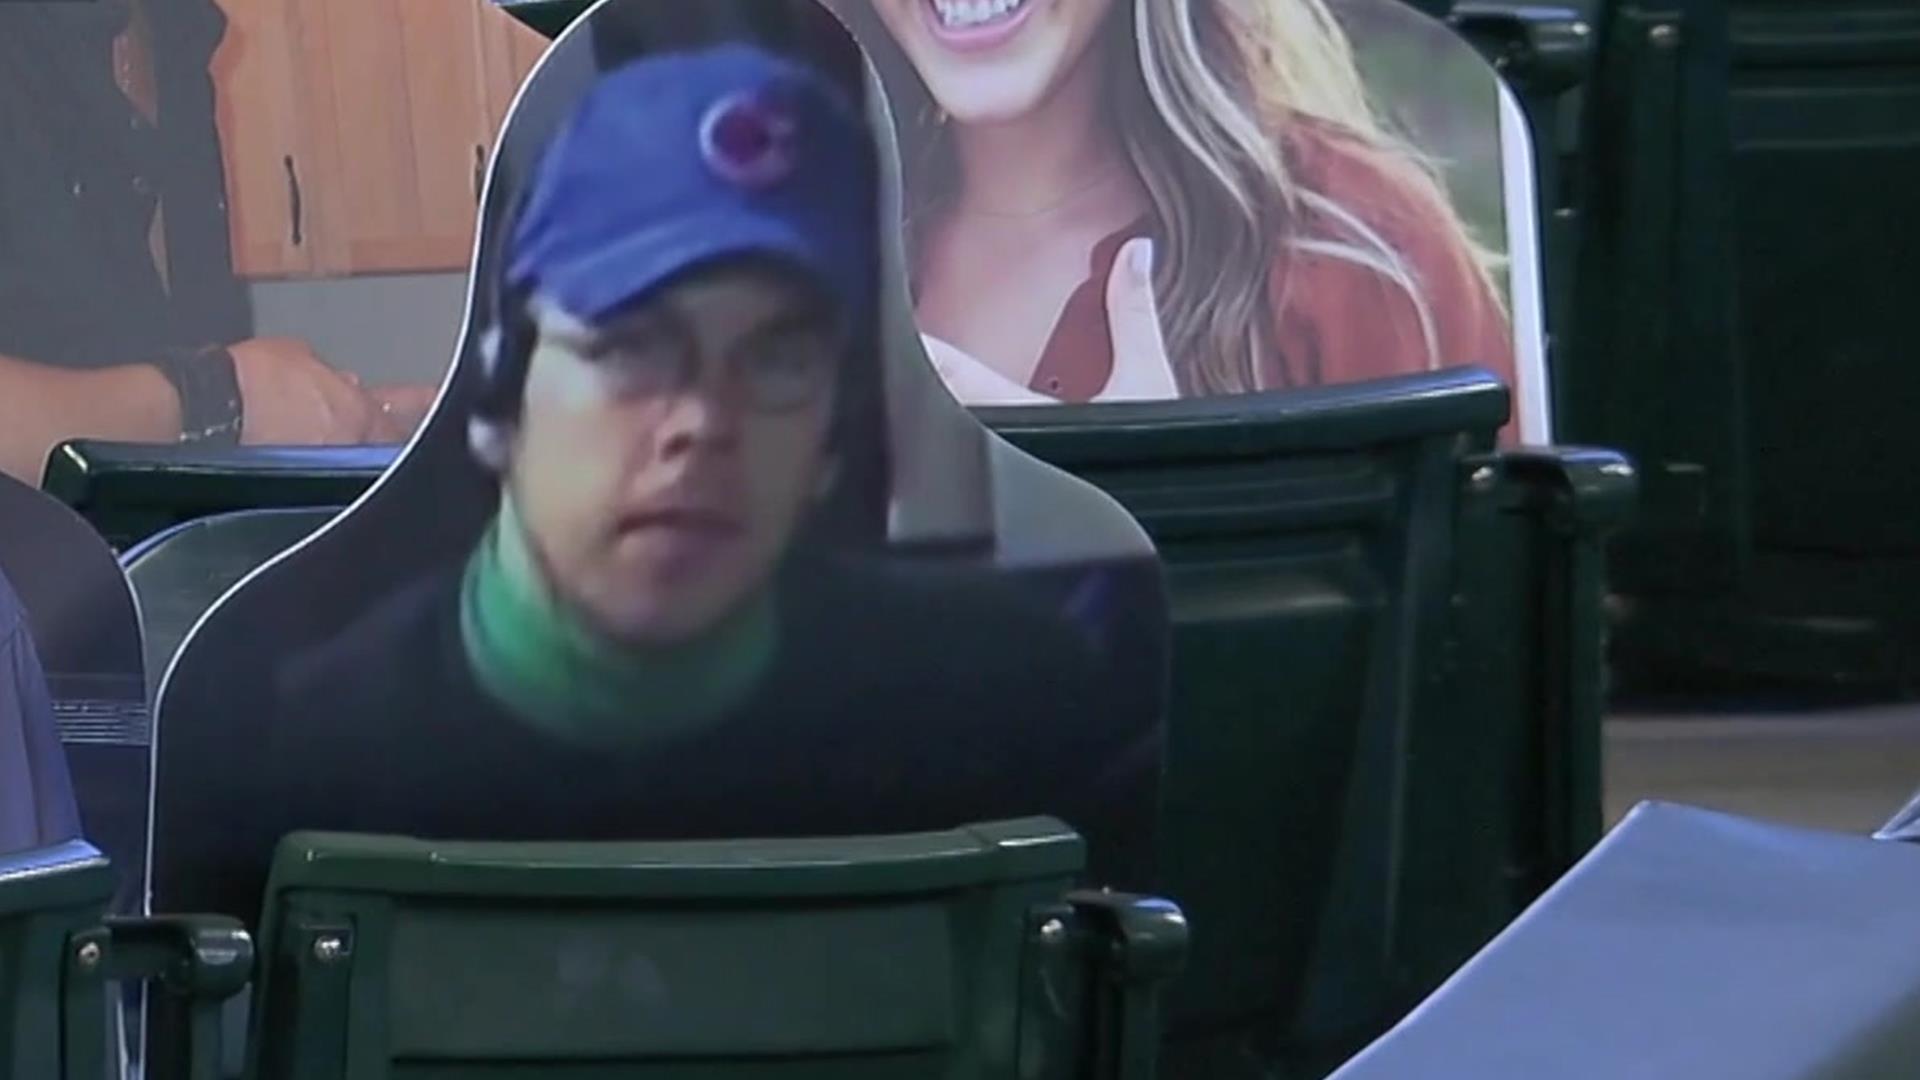 LOOK: Cardboard cutout of Steve Bartman shows up on A's-Mariners